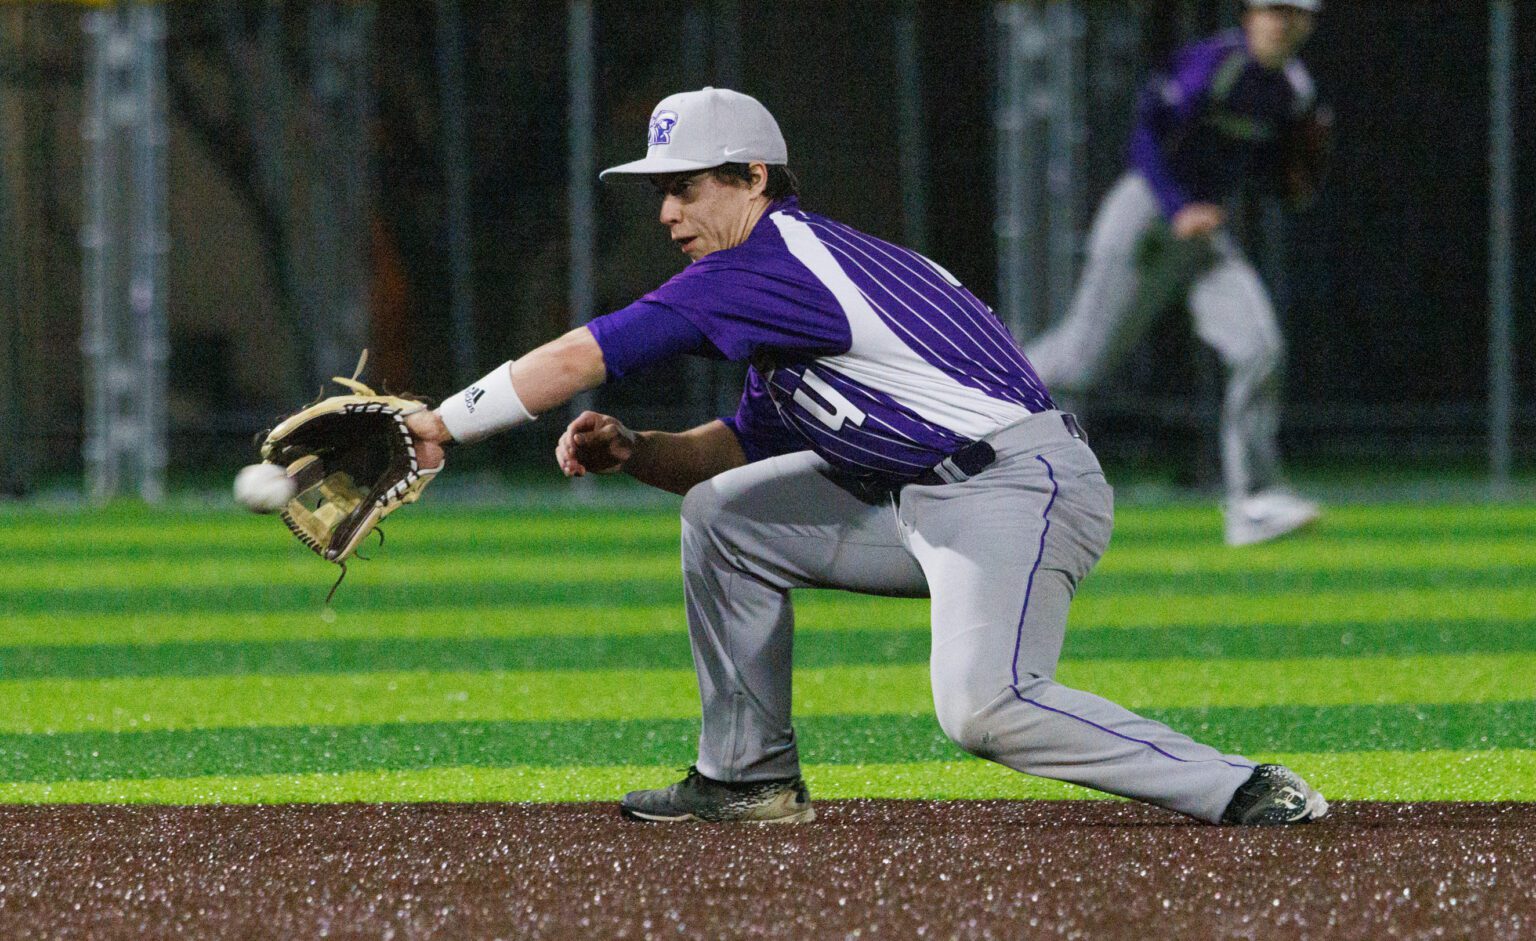 Nooksack Valley's Jacob Tresselt makes a backhanded catch as Nooksack Valley beat Bellingham 2-1 on March 24.